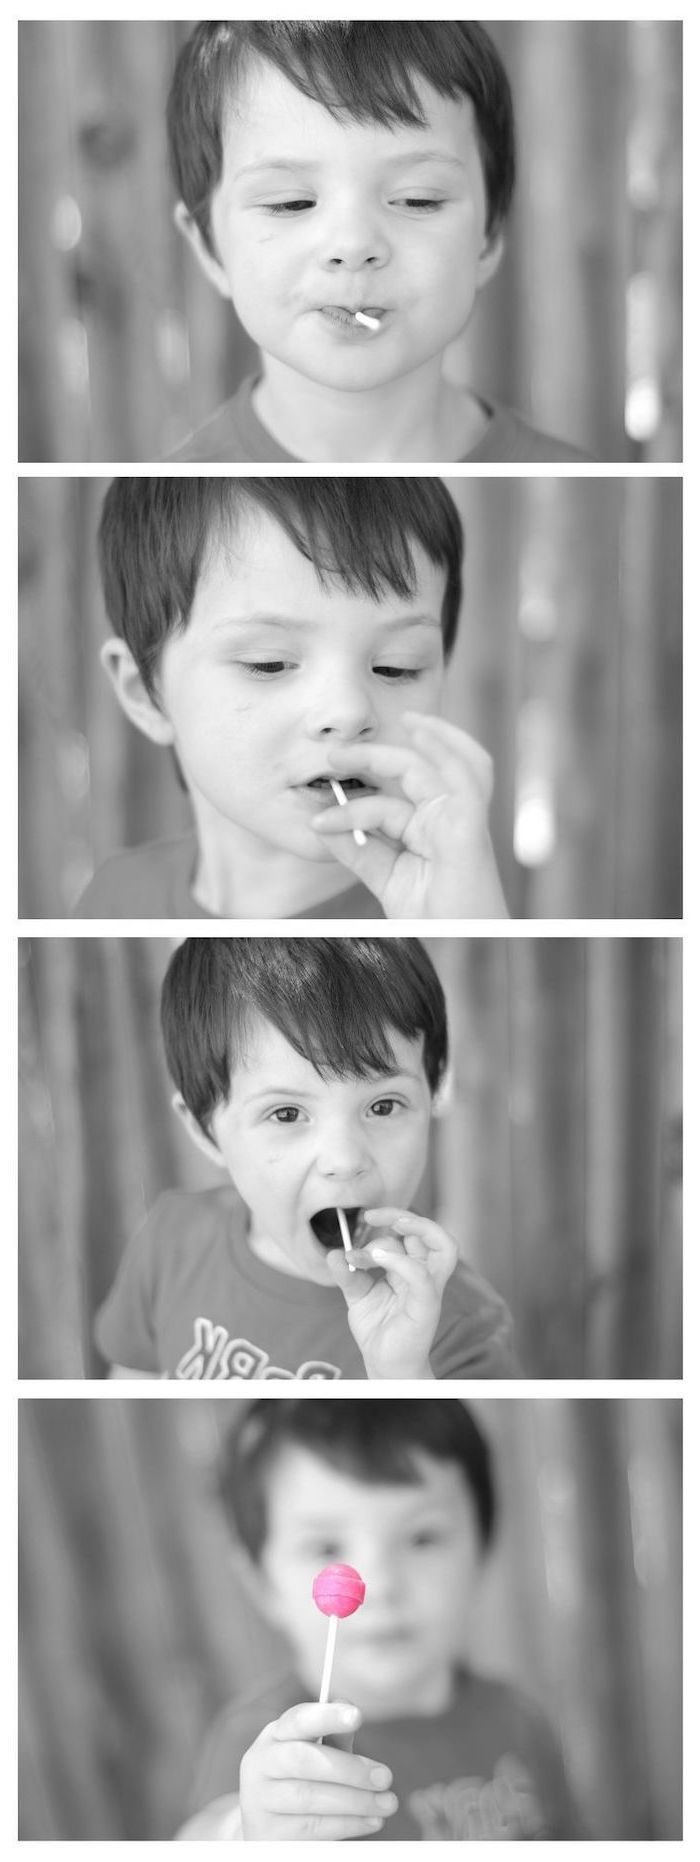 black and white, photo collage, little boy, gender reveal balloons, pink lollipop